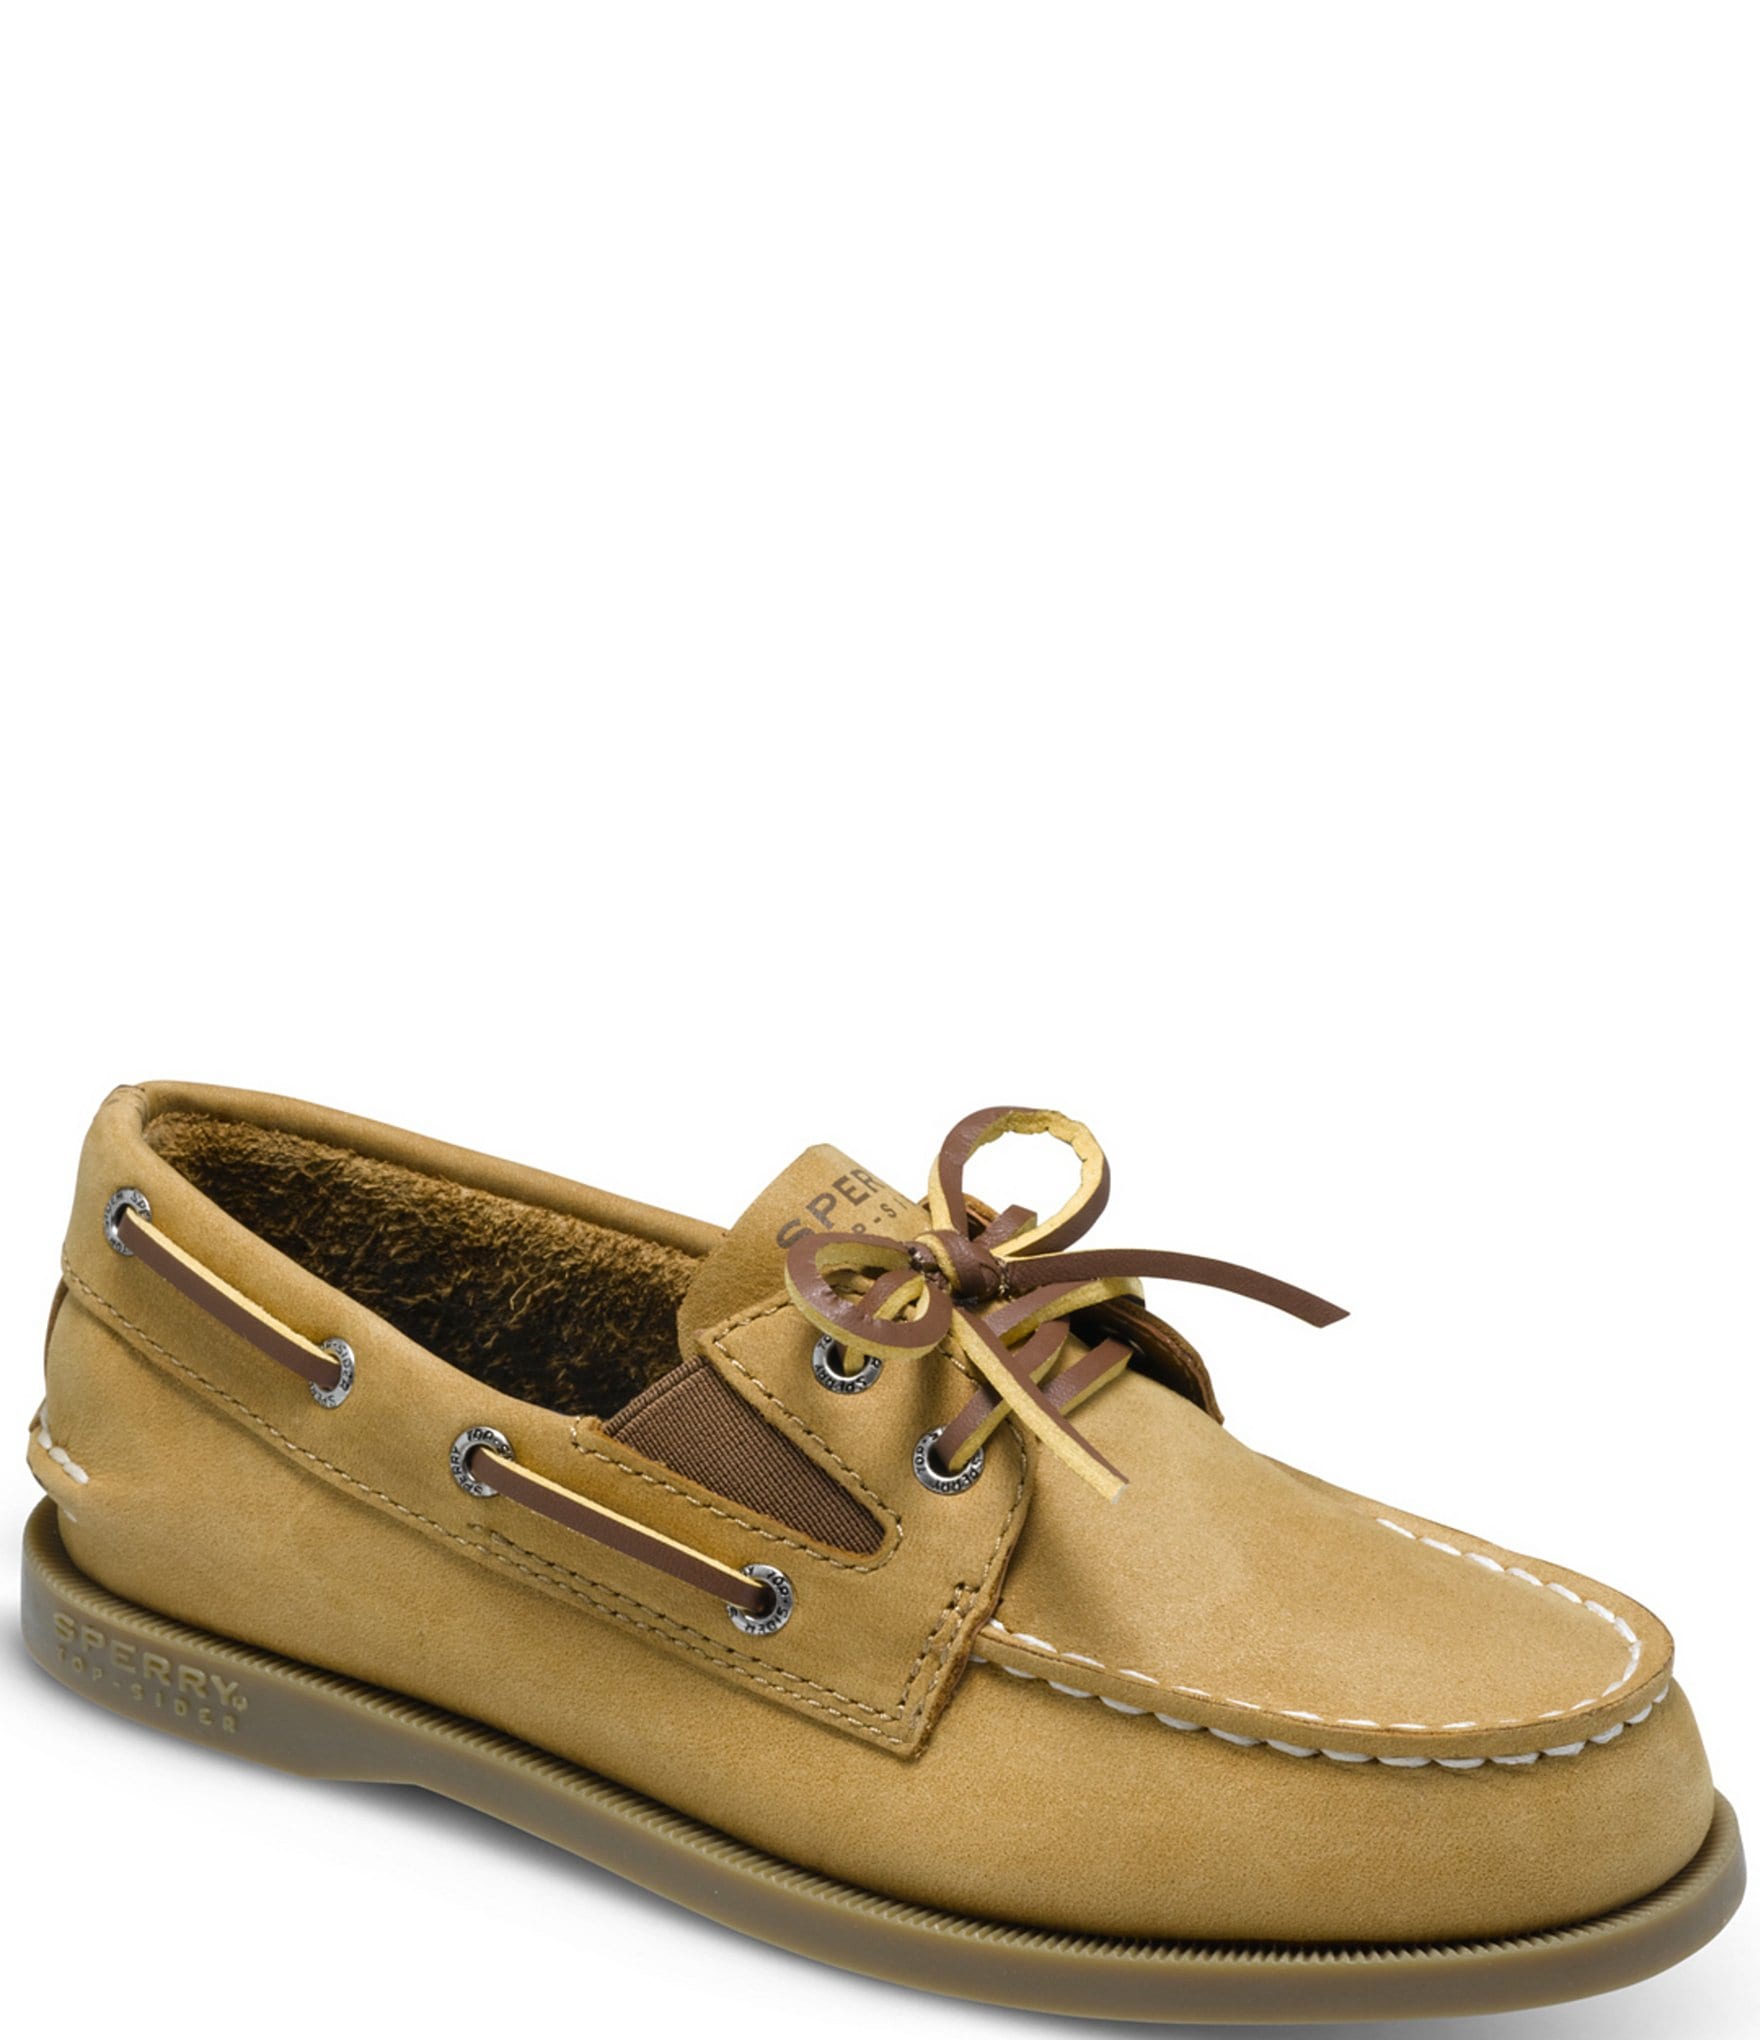 Sperry Top-Sider by Jeffrey CVO Pony Hair Brown Slip-On Sneakers Boat Shoes 